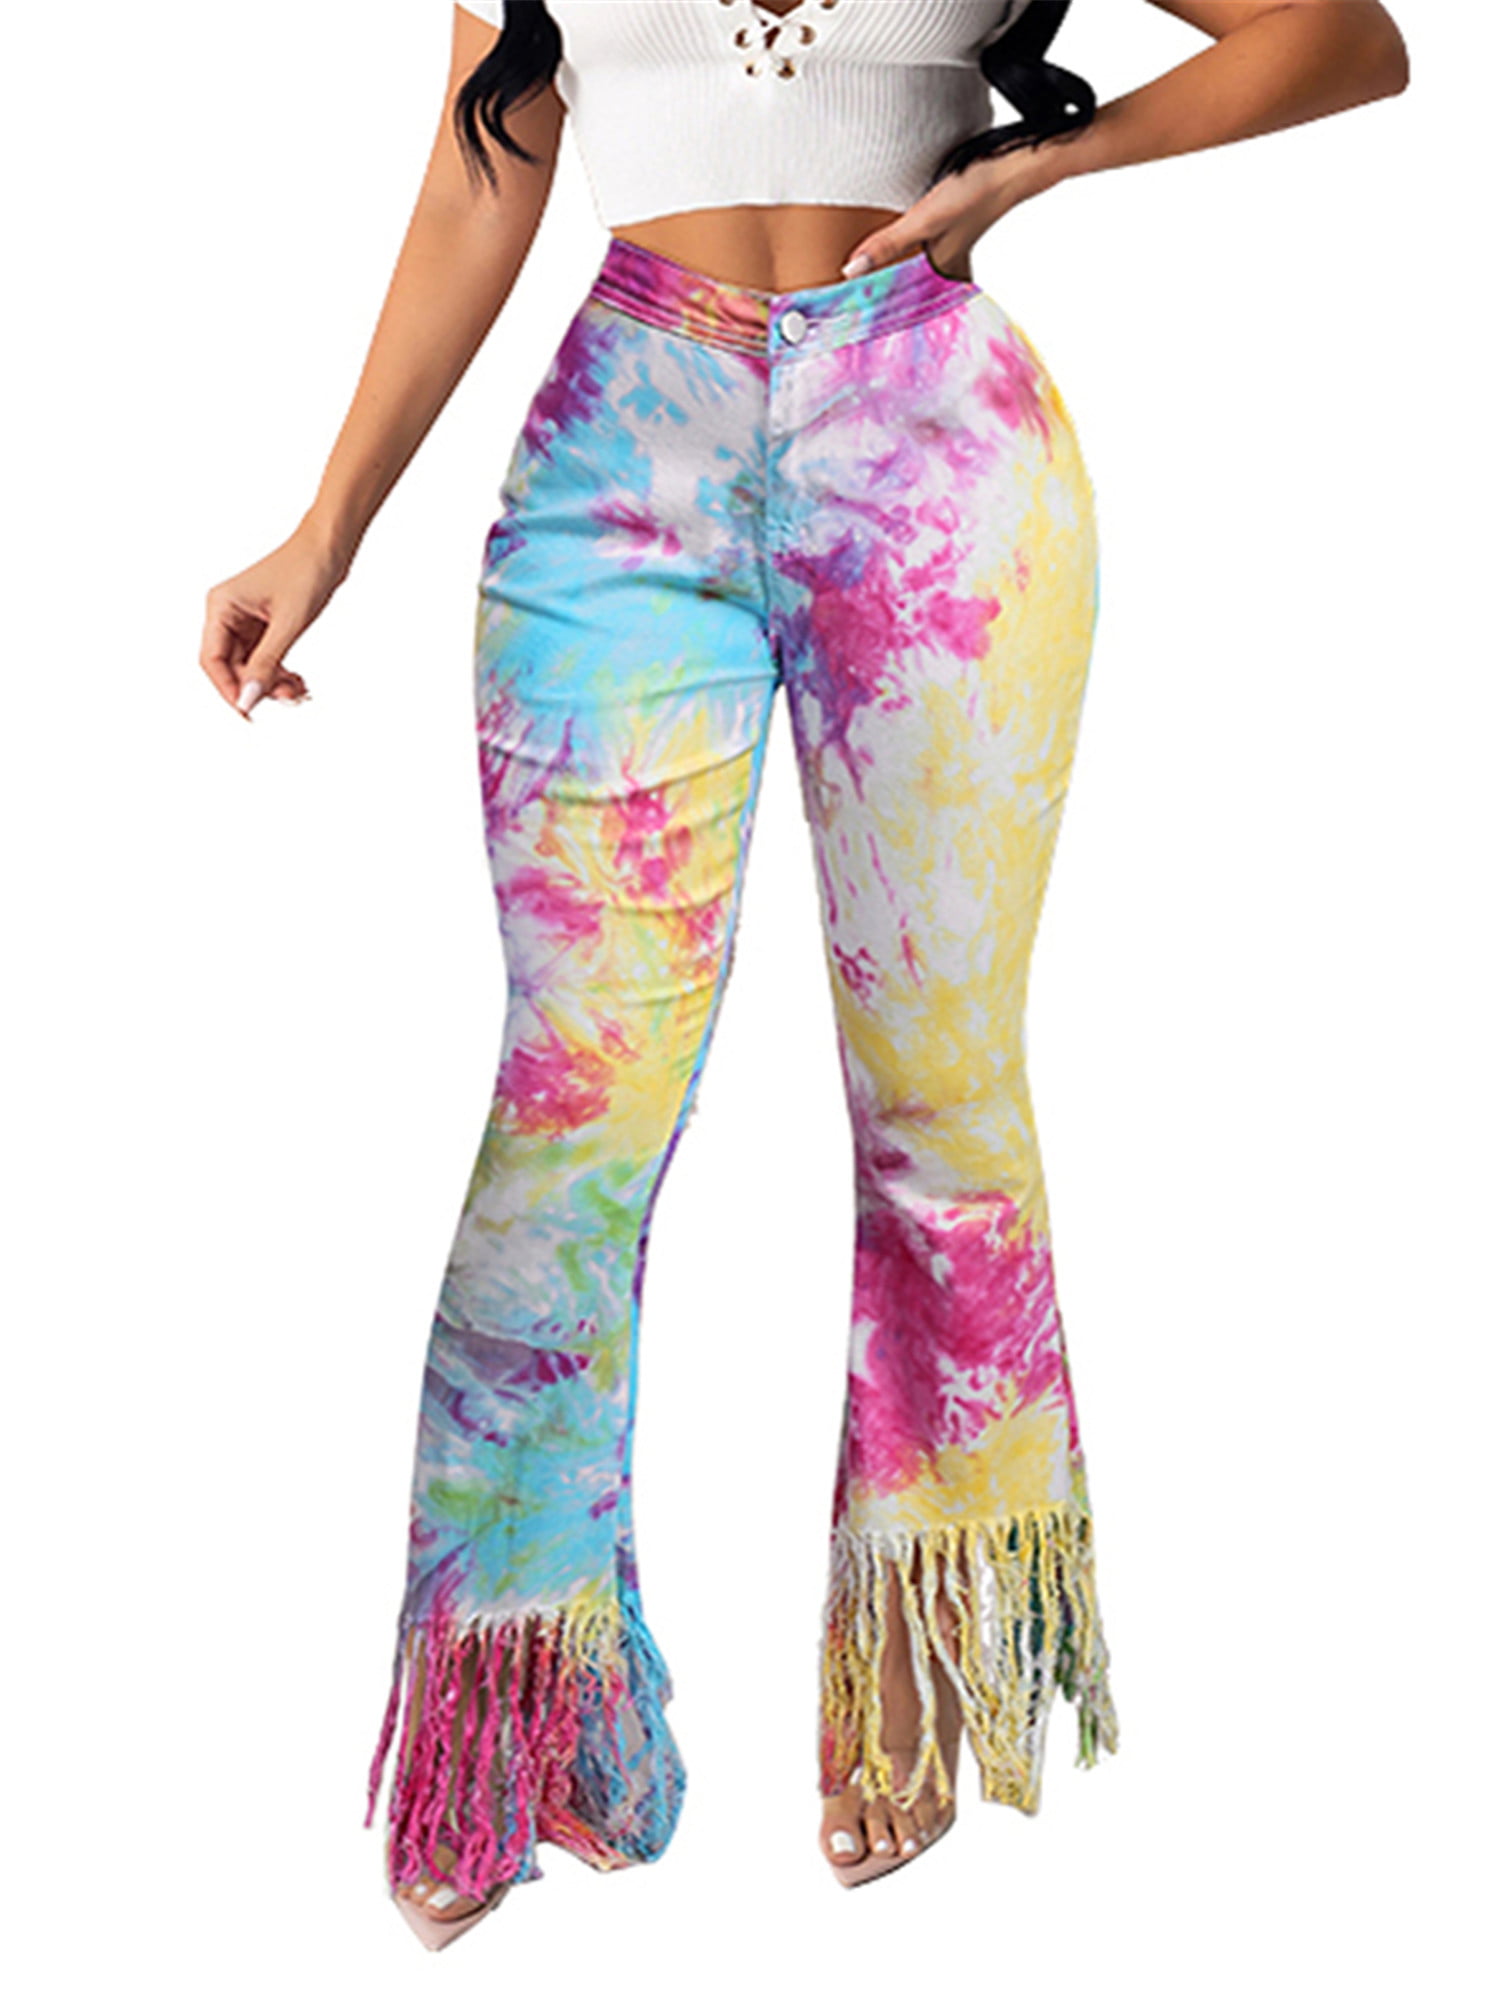 Made in the USA Woman\u2019s 2X Stretchy Blue Tie dye bell bottoms Cotton